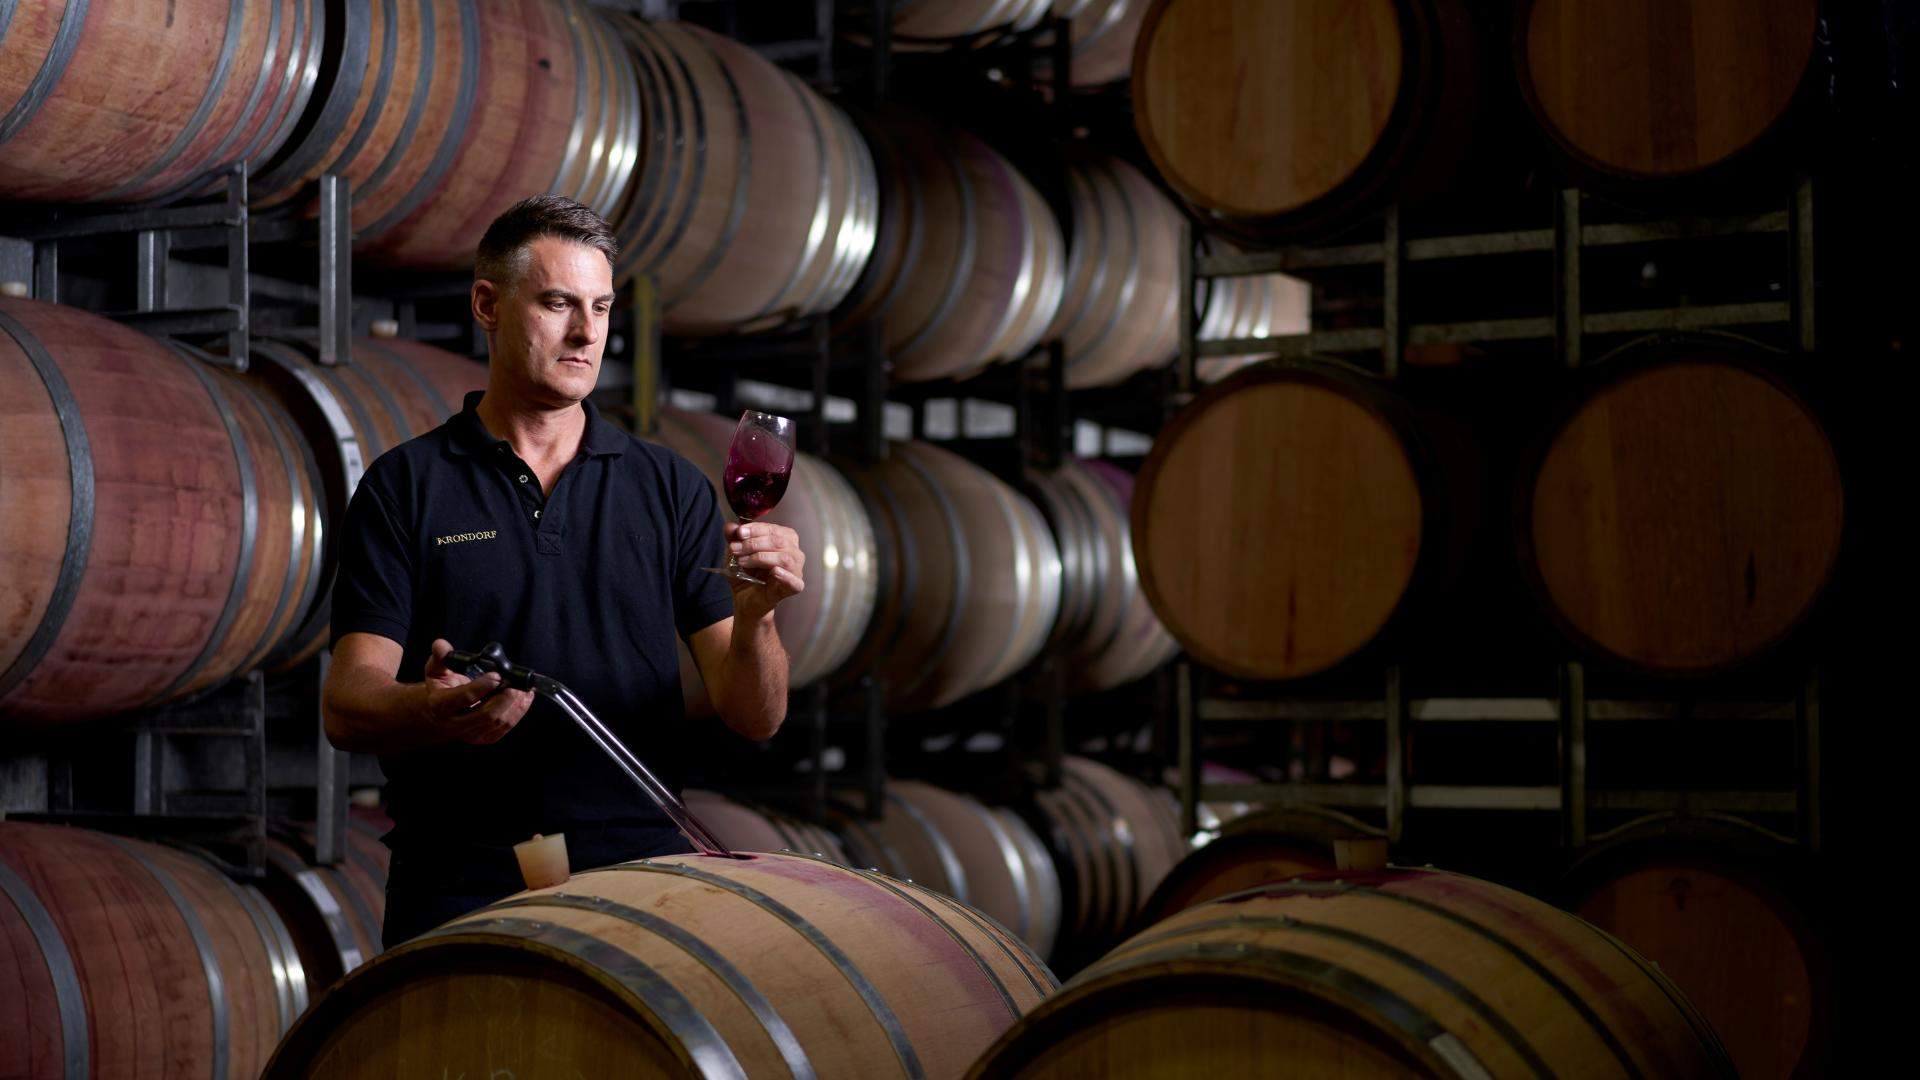 Traditional Vino in a Modern Venue: Nick Badrice of Krondorf Wines on the History, Flavours and Future of the Barossa